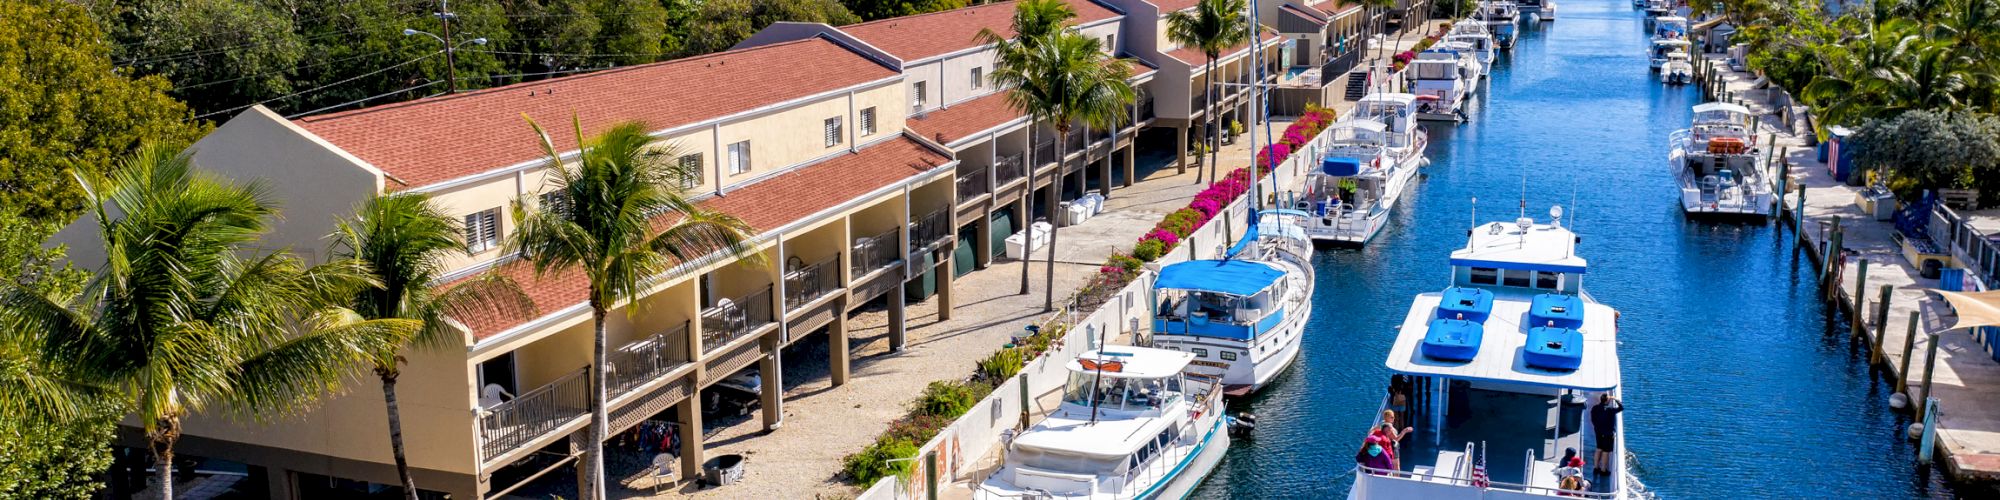 Waterside Suites and Marina